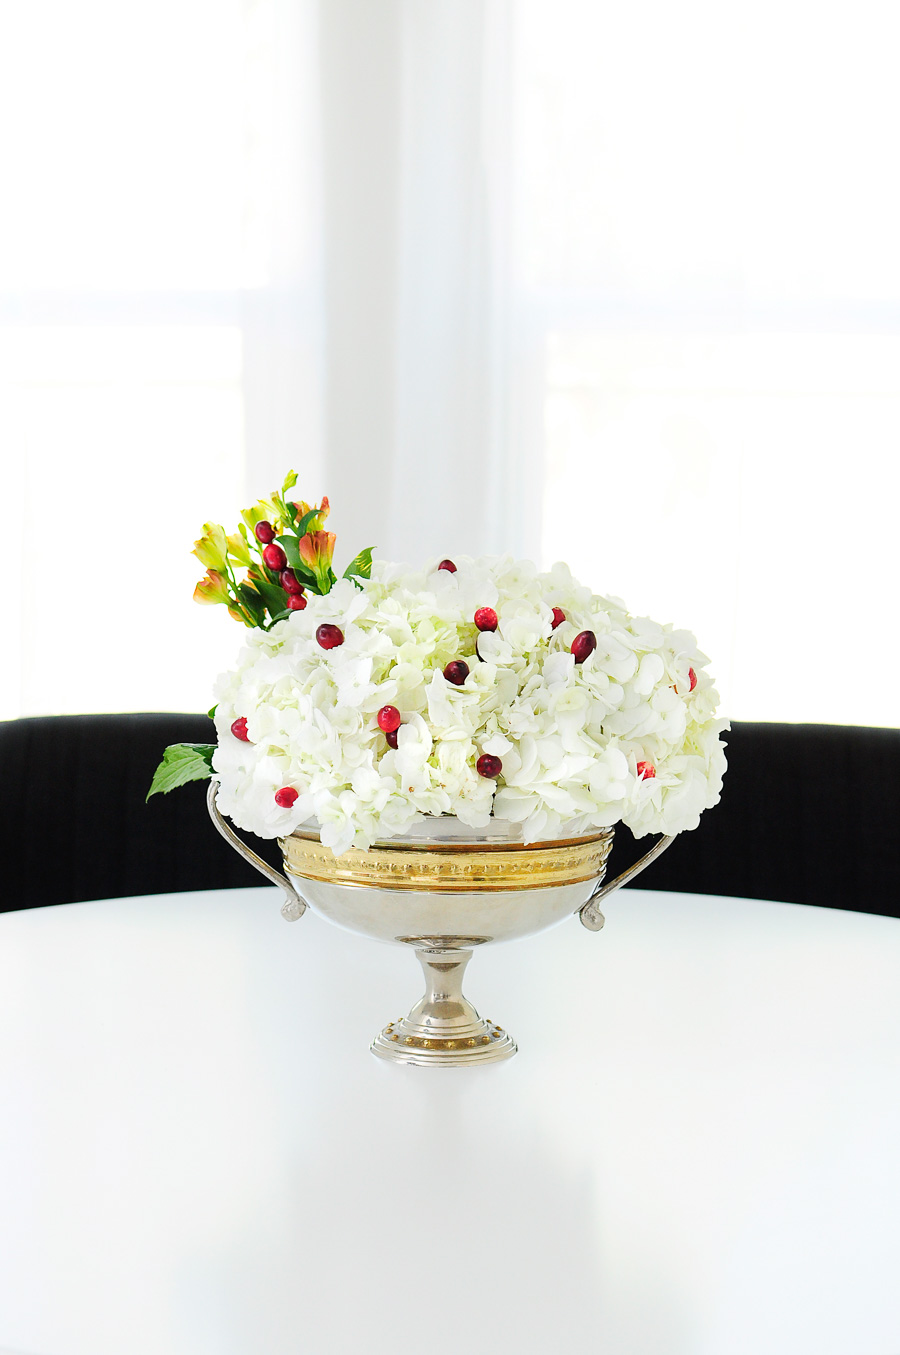 White hydrangeas paired with cranberries and greenery make a simple and elegant centerpiece for any holiday tablescape.